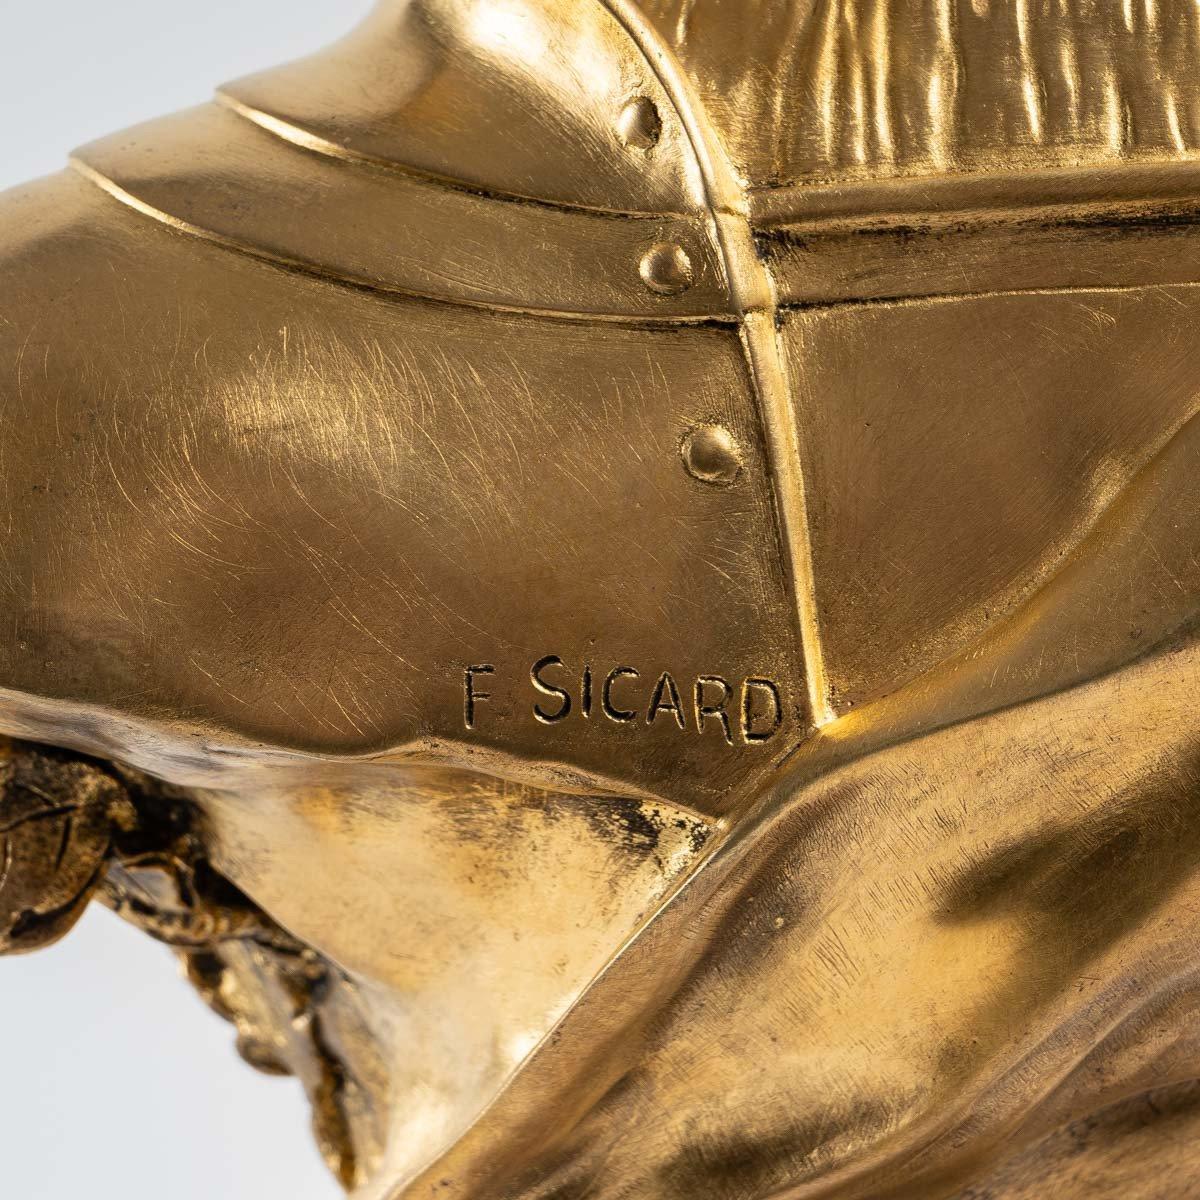 Sculpture of Joan of Arc by François Sicard in gilded bronze 2